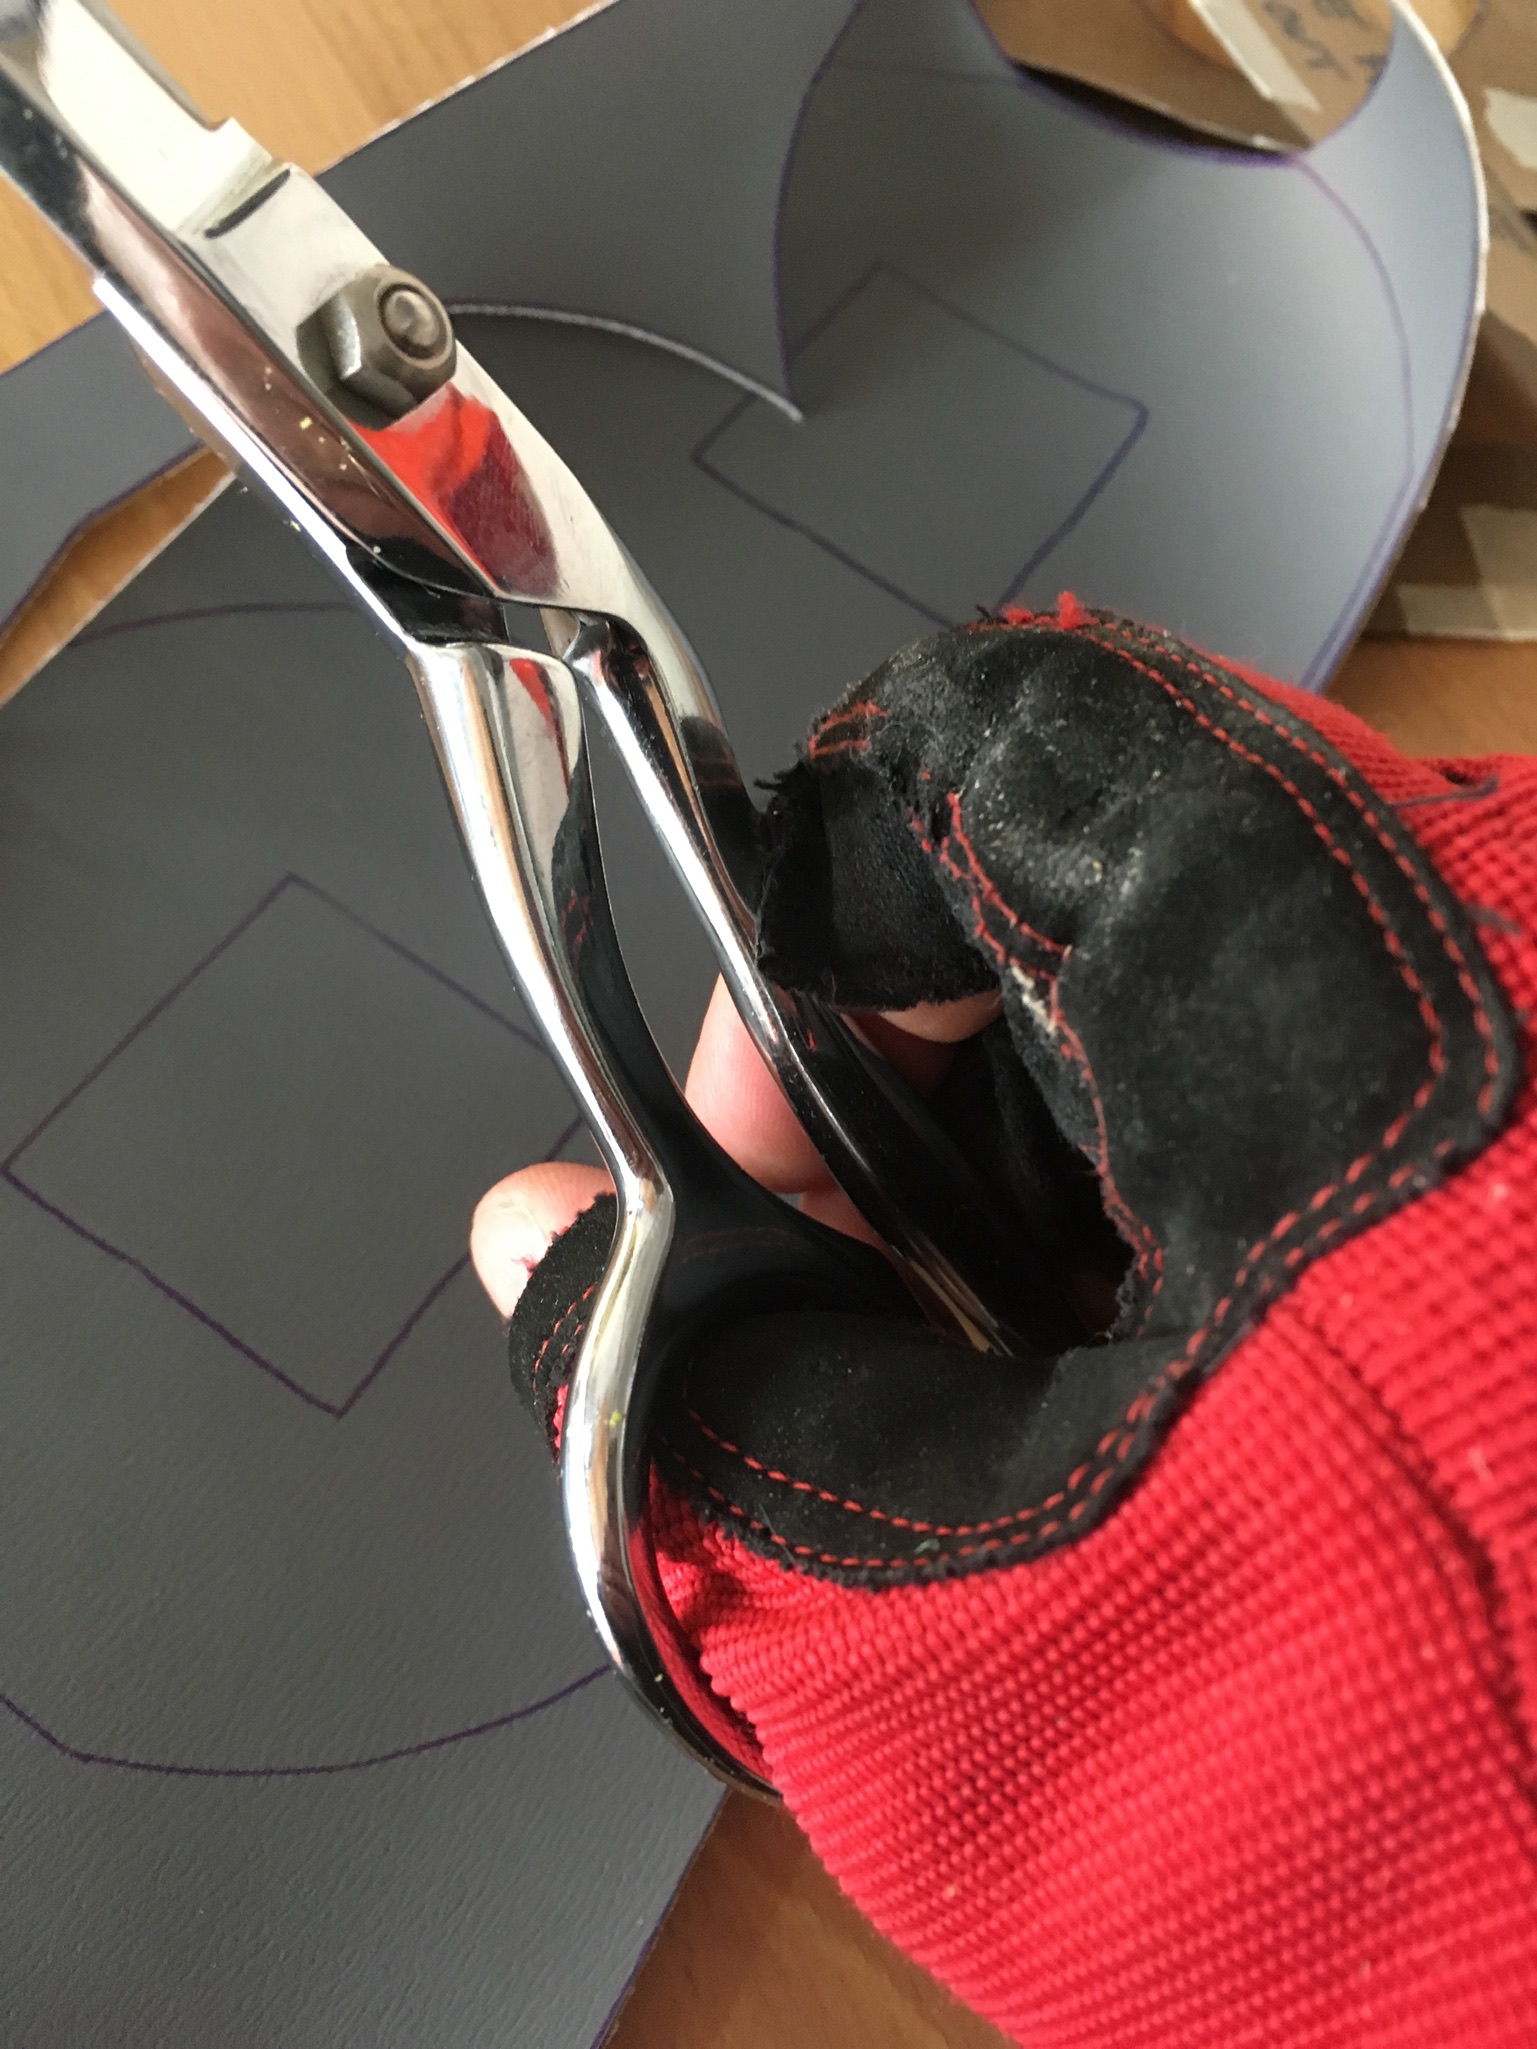 Sewing Reinforcing Patches on Highfield CL340 Dinghy Chaps